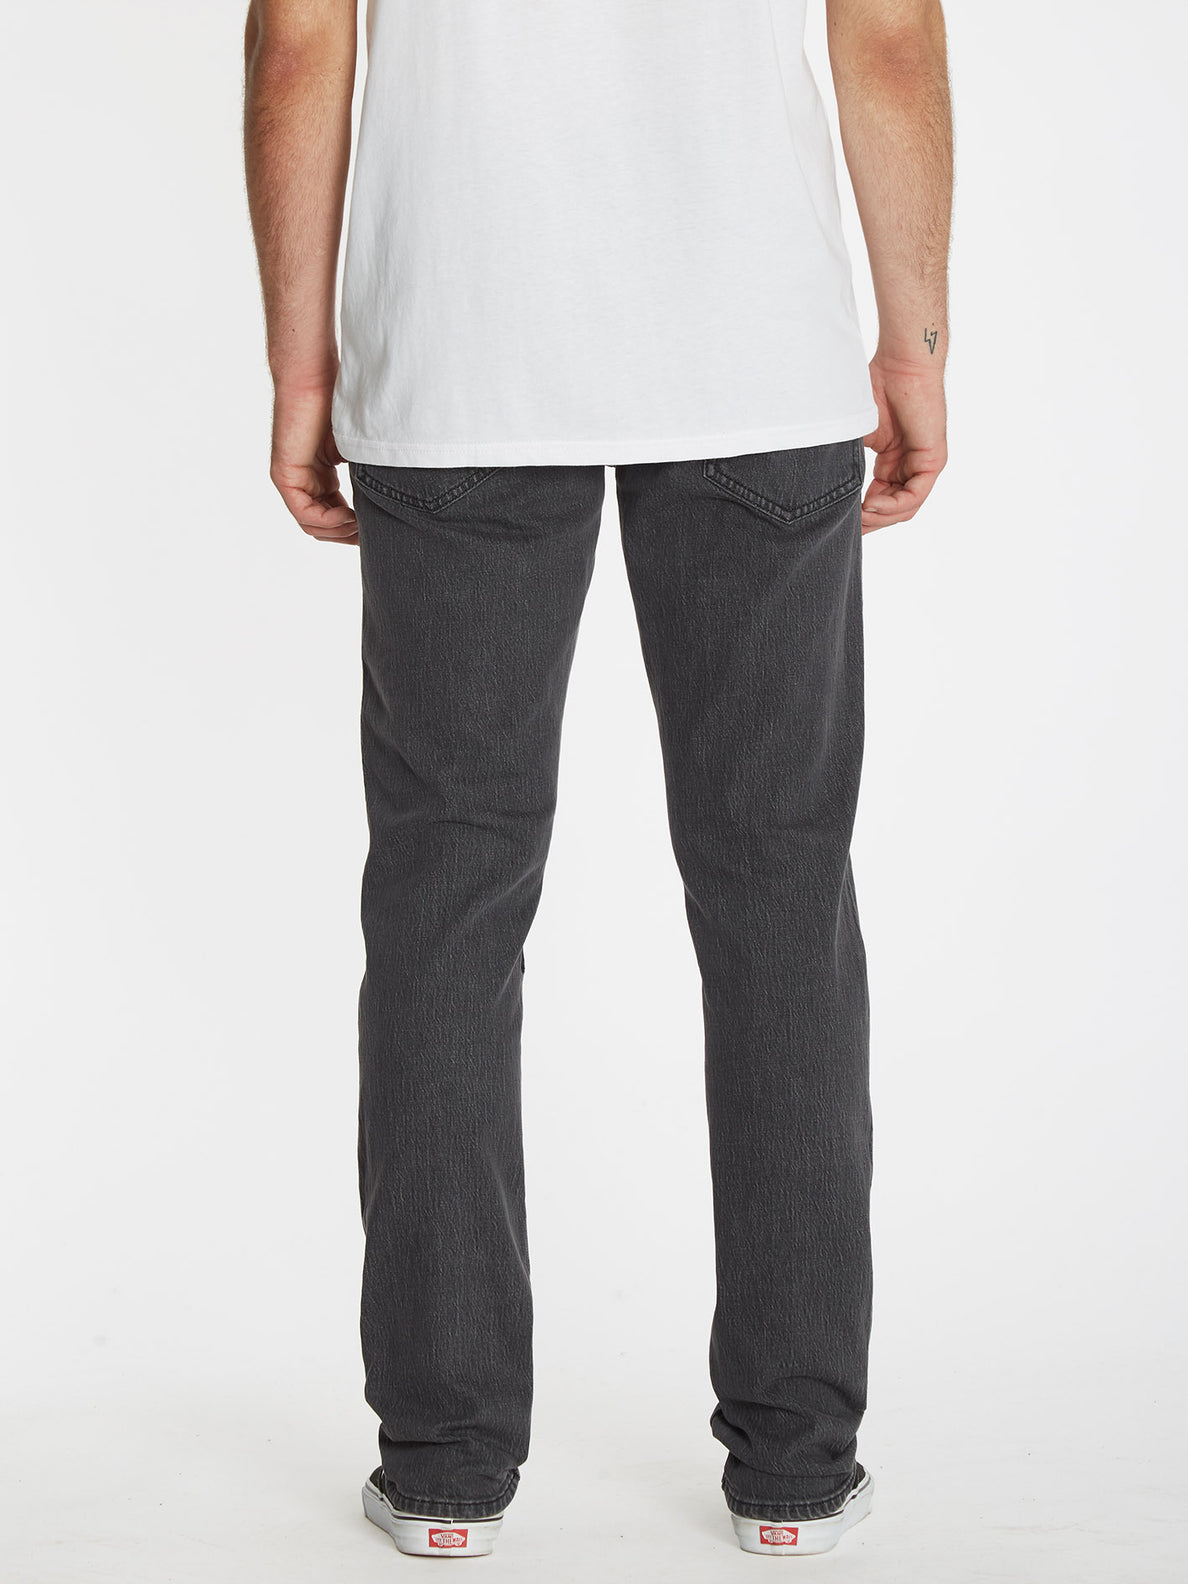 Solver Tapered Jeans - STONEY BLACK (A1932201_STY) [B]